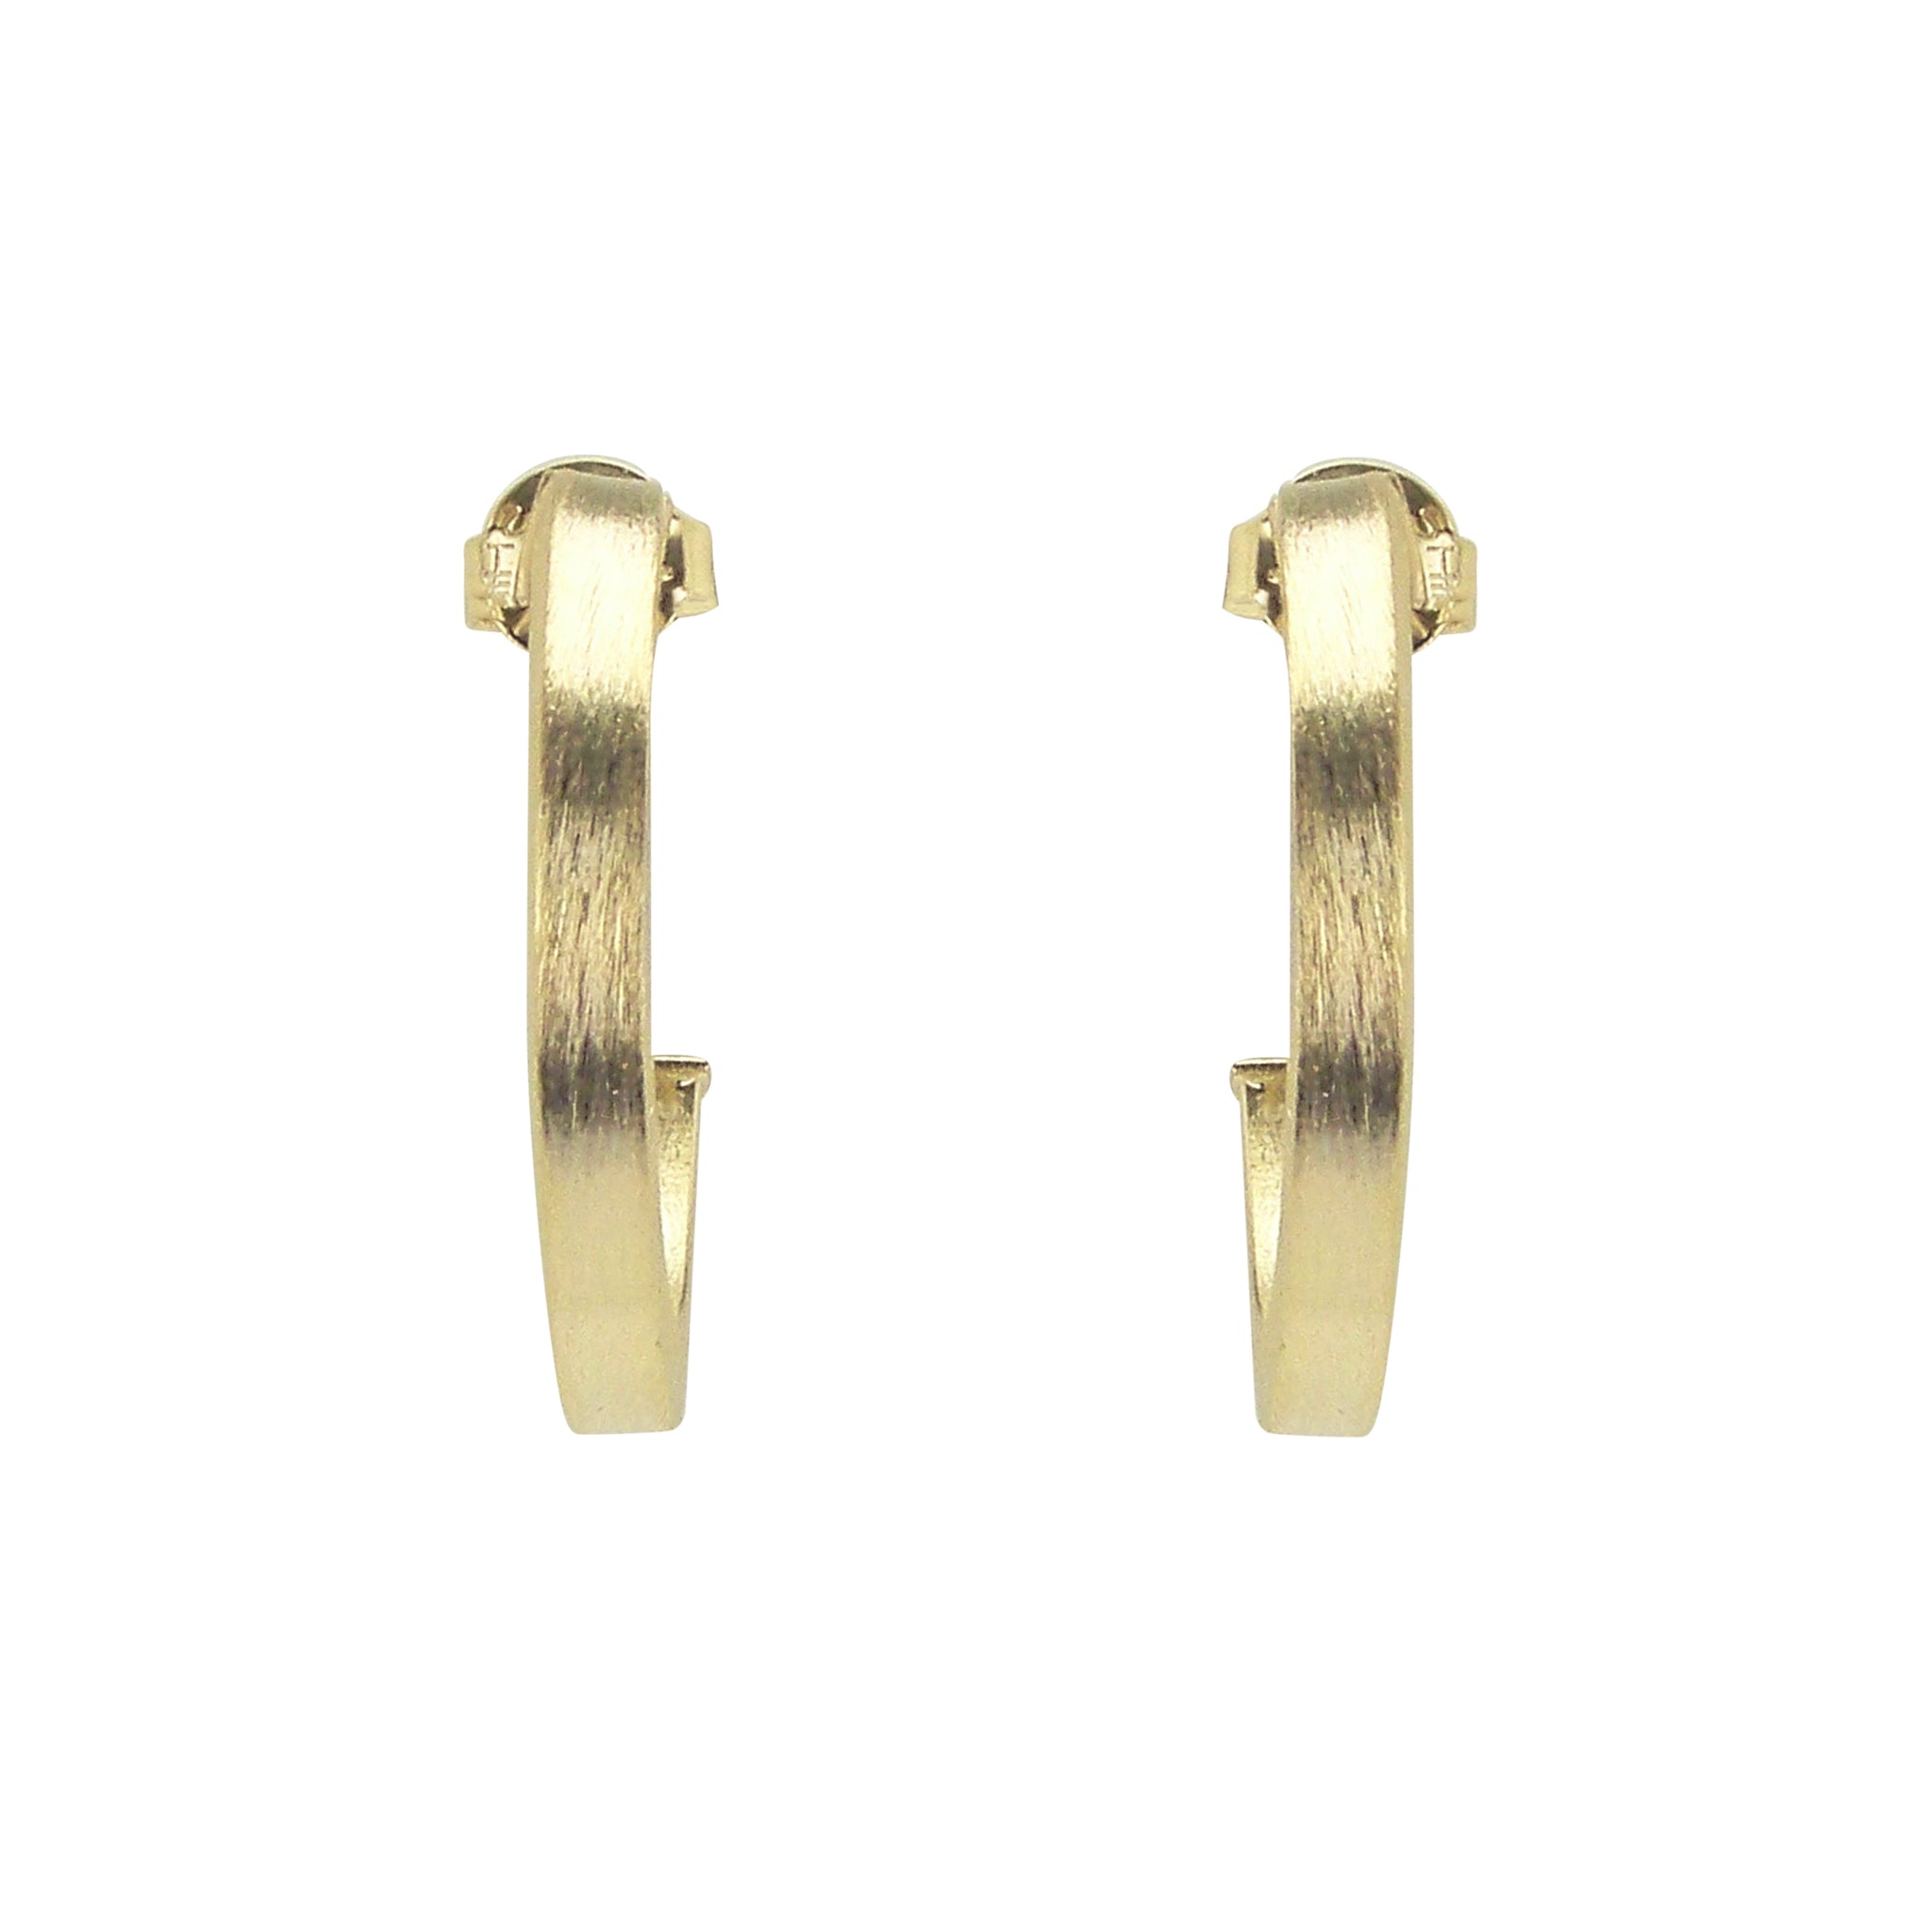 Front View of Sheila Fajl Ilana Bold Square Tube Hoop Earrings in Gold Plated